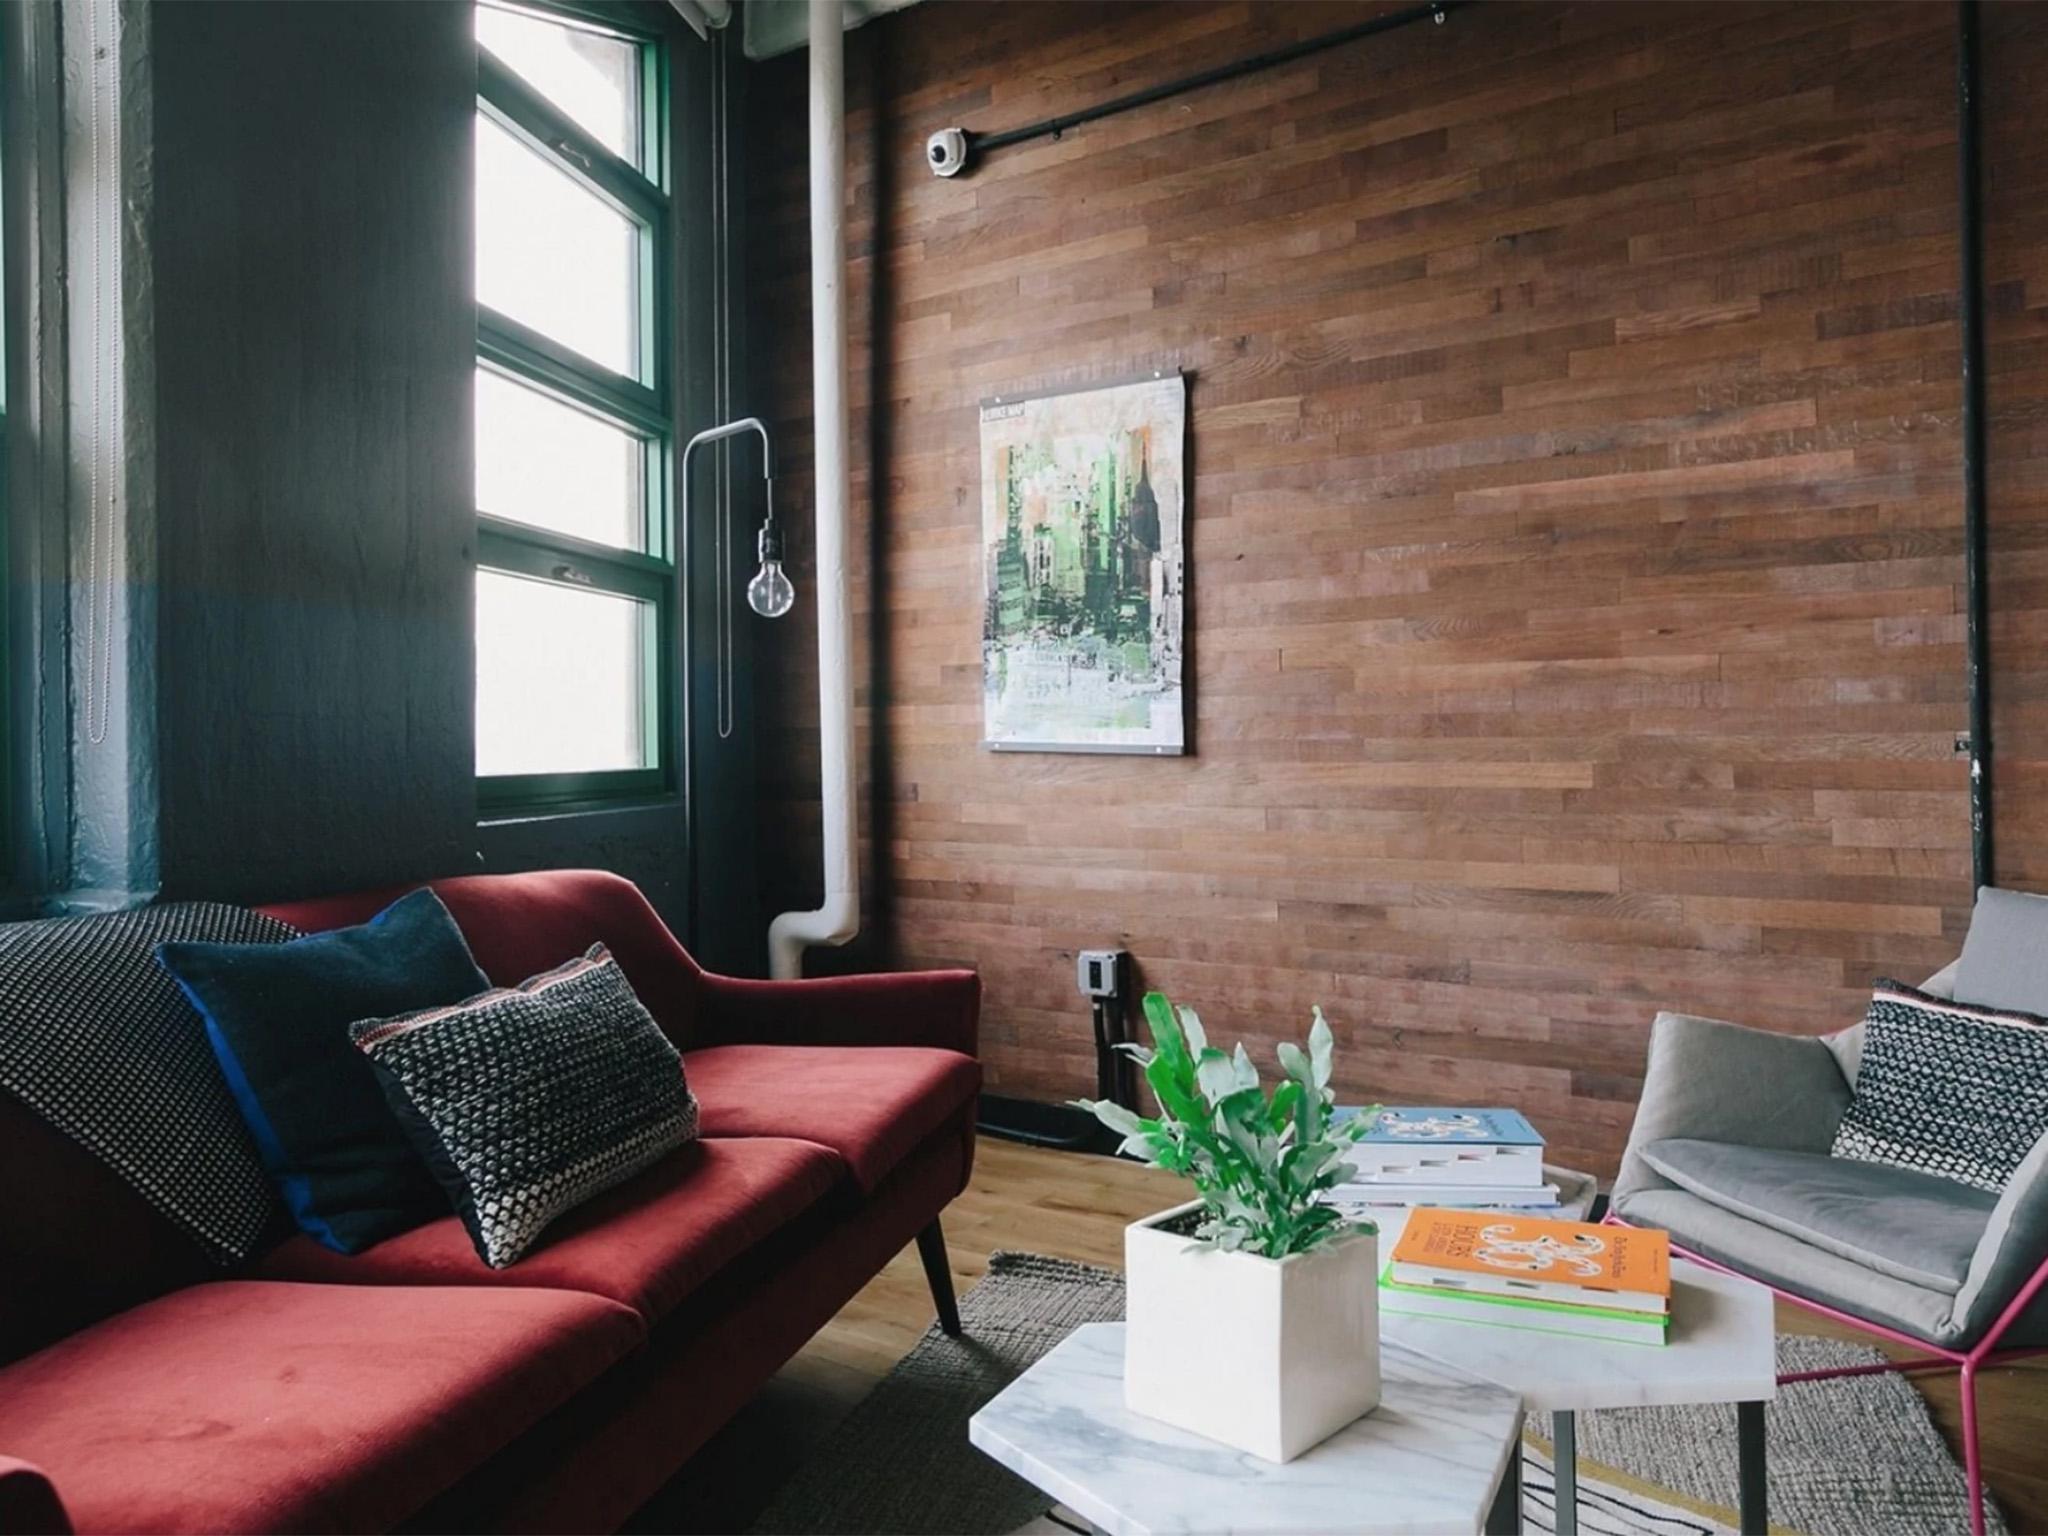 Reclaimed wood siding is becoming popular, but don’t limit it to the floors